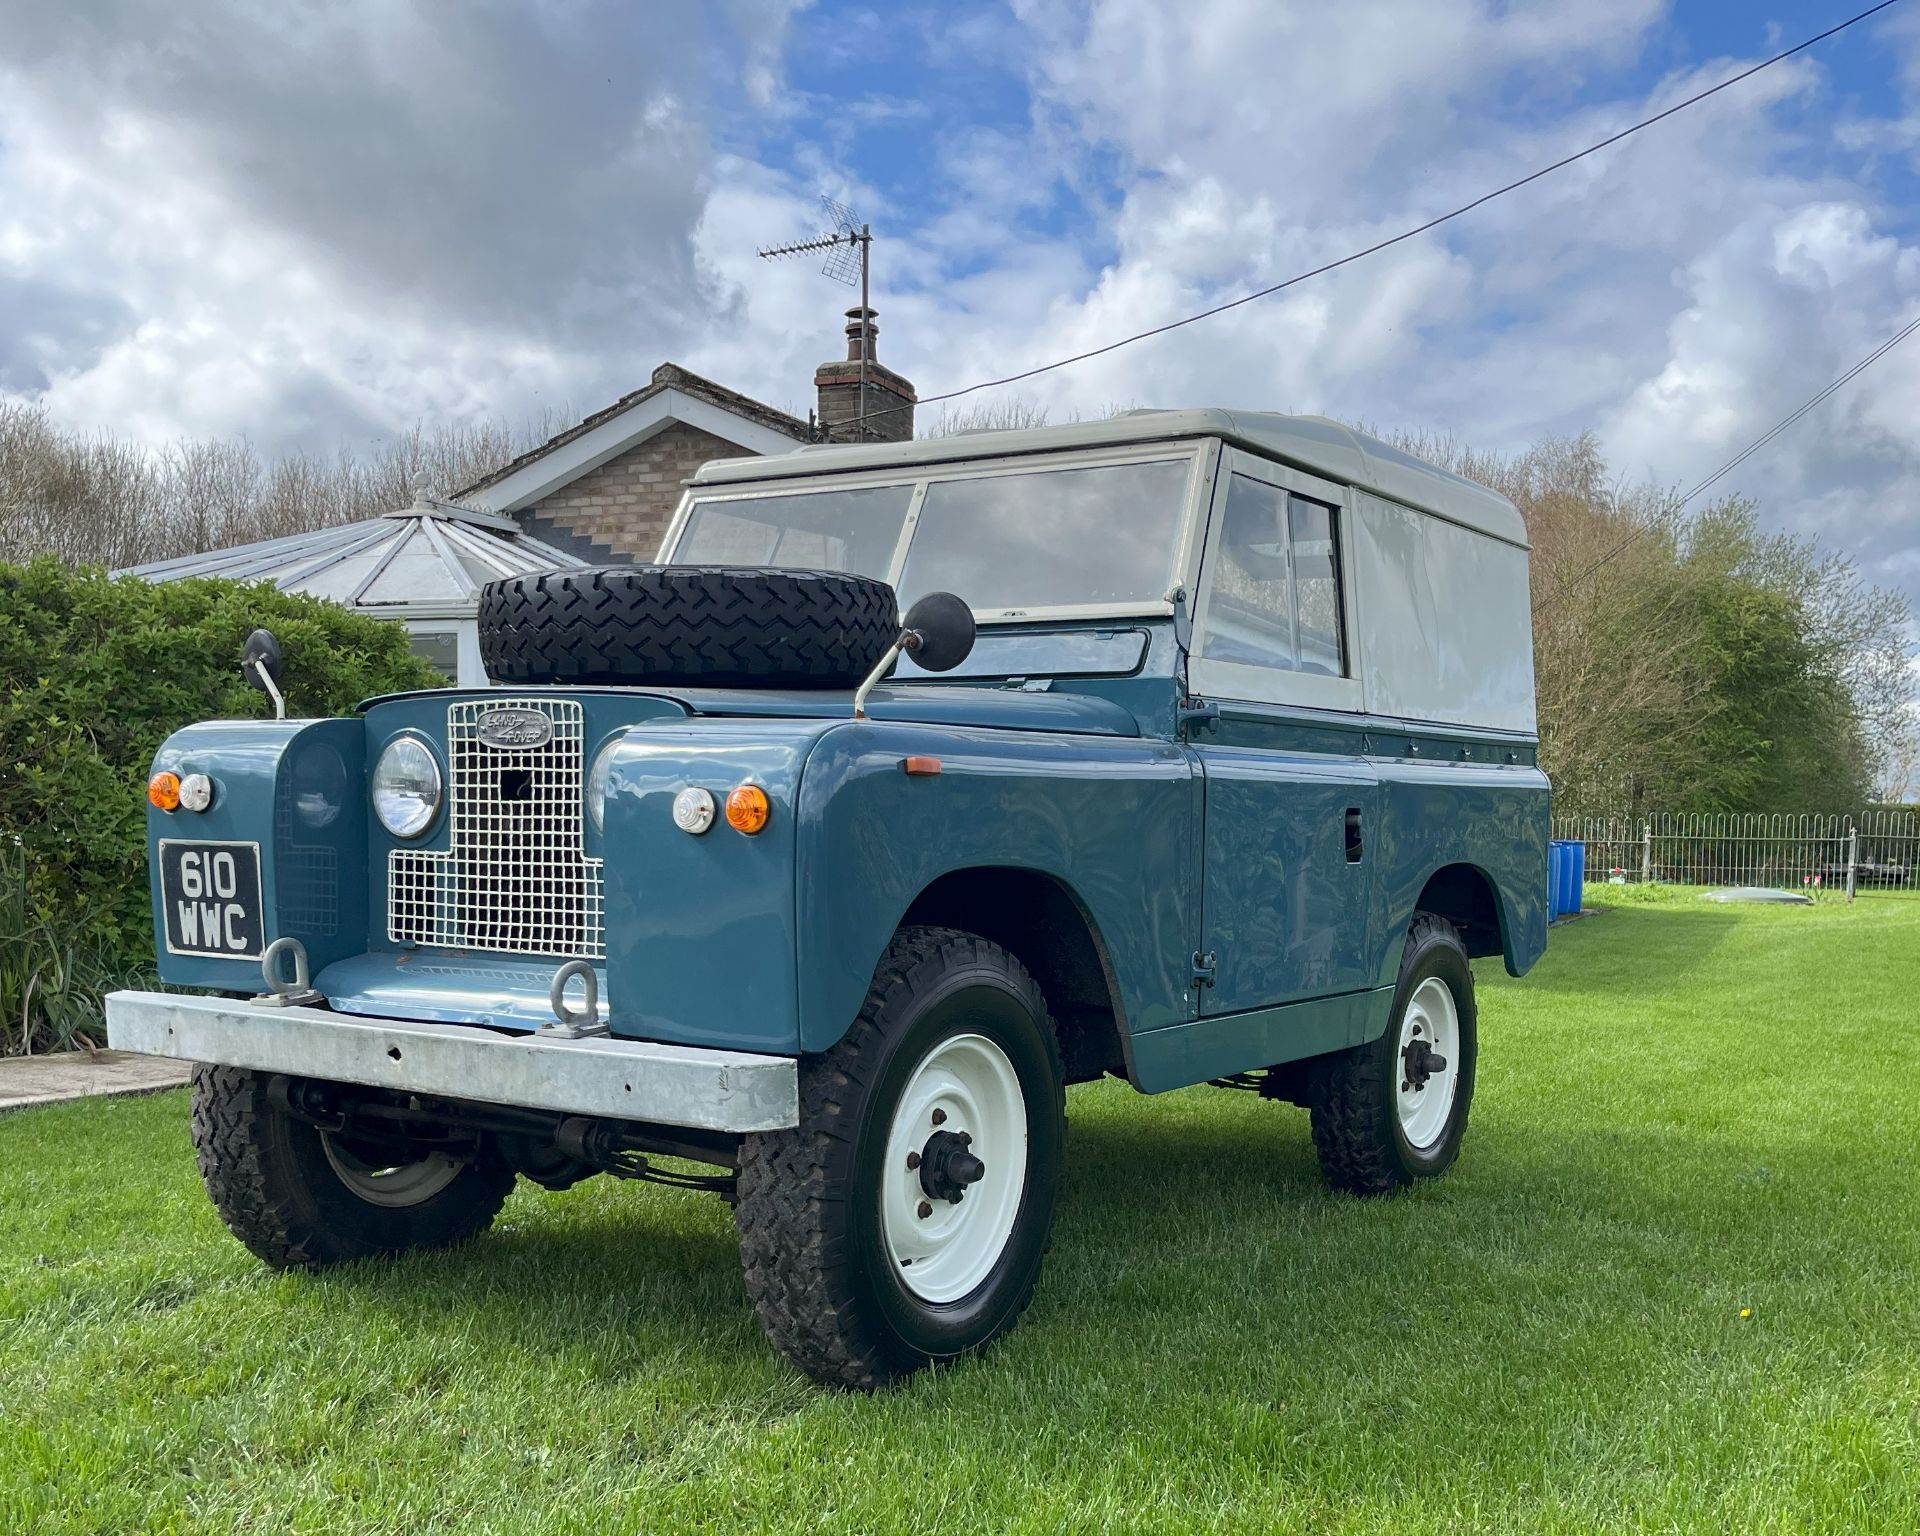 1962 Land Rover 88 Series II, petrol 2.25 litre engine, blue with 64,078 showing on the milometer, - Image 14 of 14